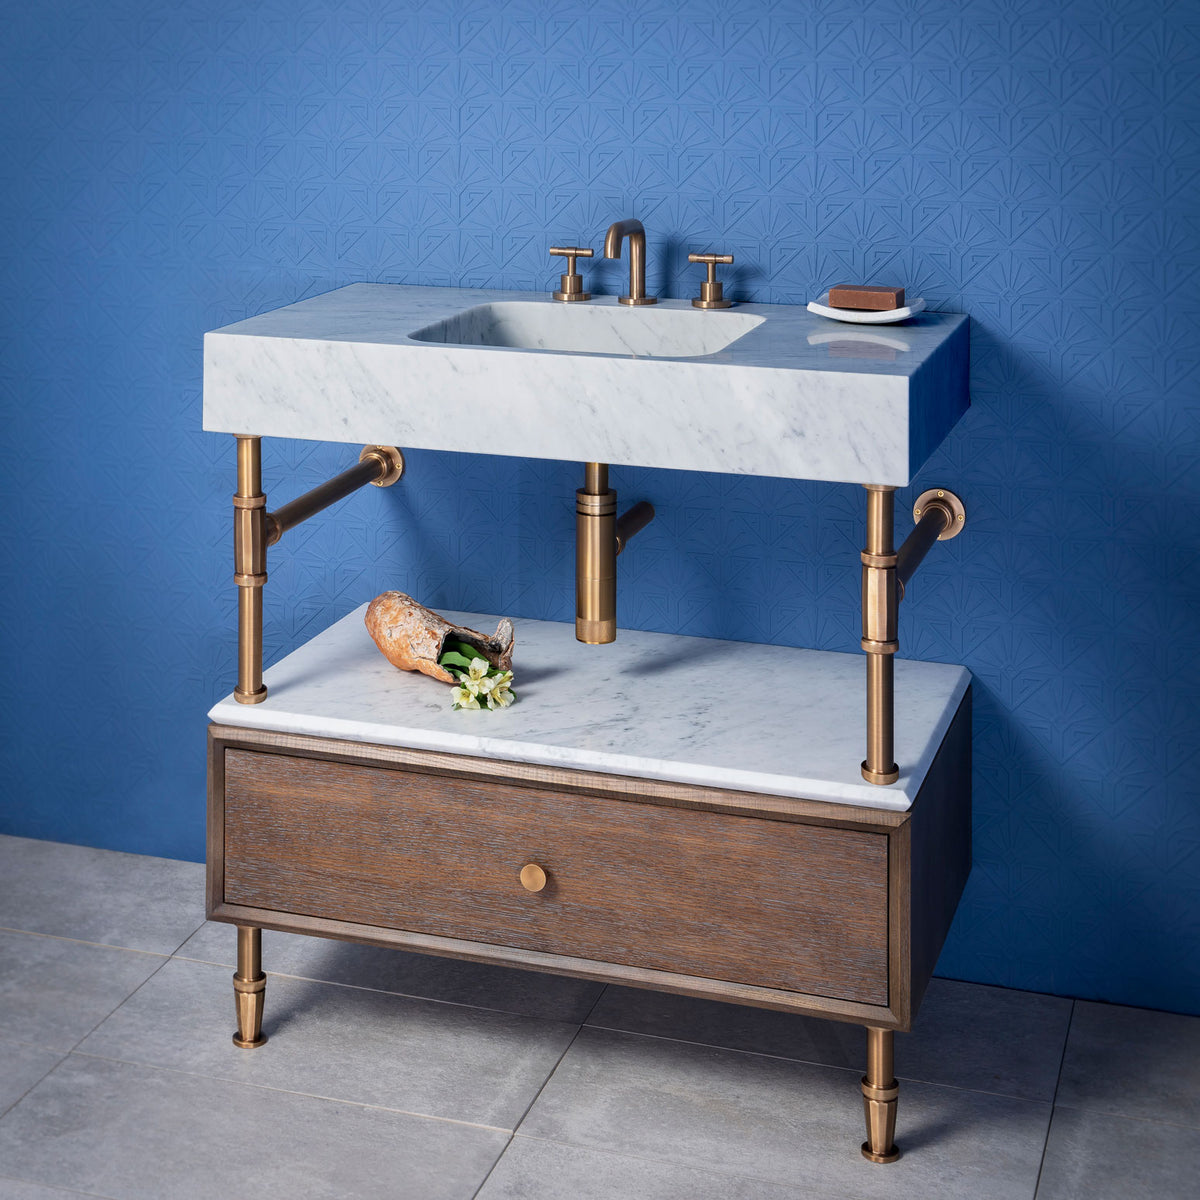 Terra Bath Sink paired with Elemental Facet Drawer Vanity with cap shelf image 1 of 2